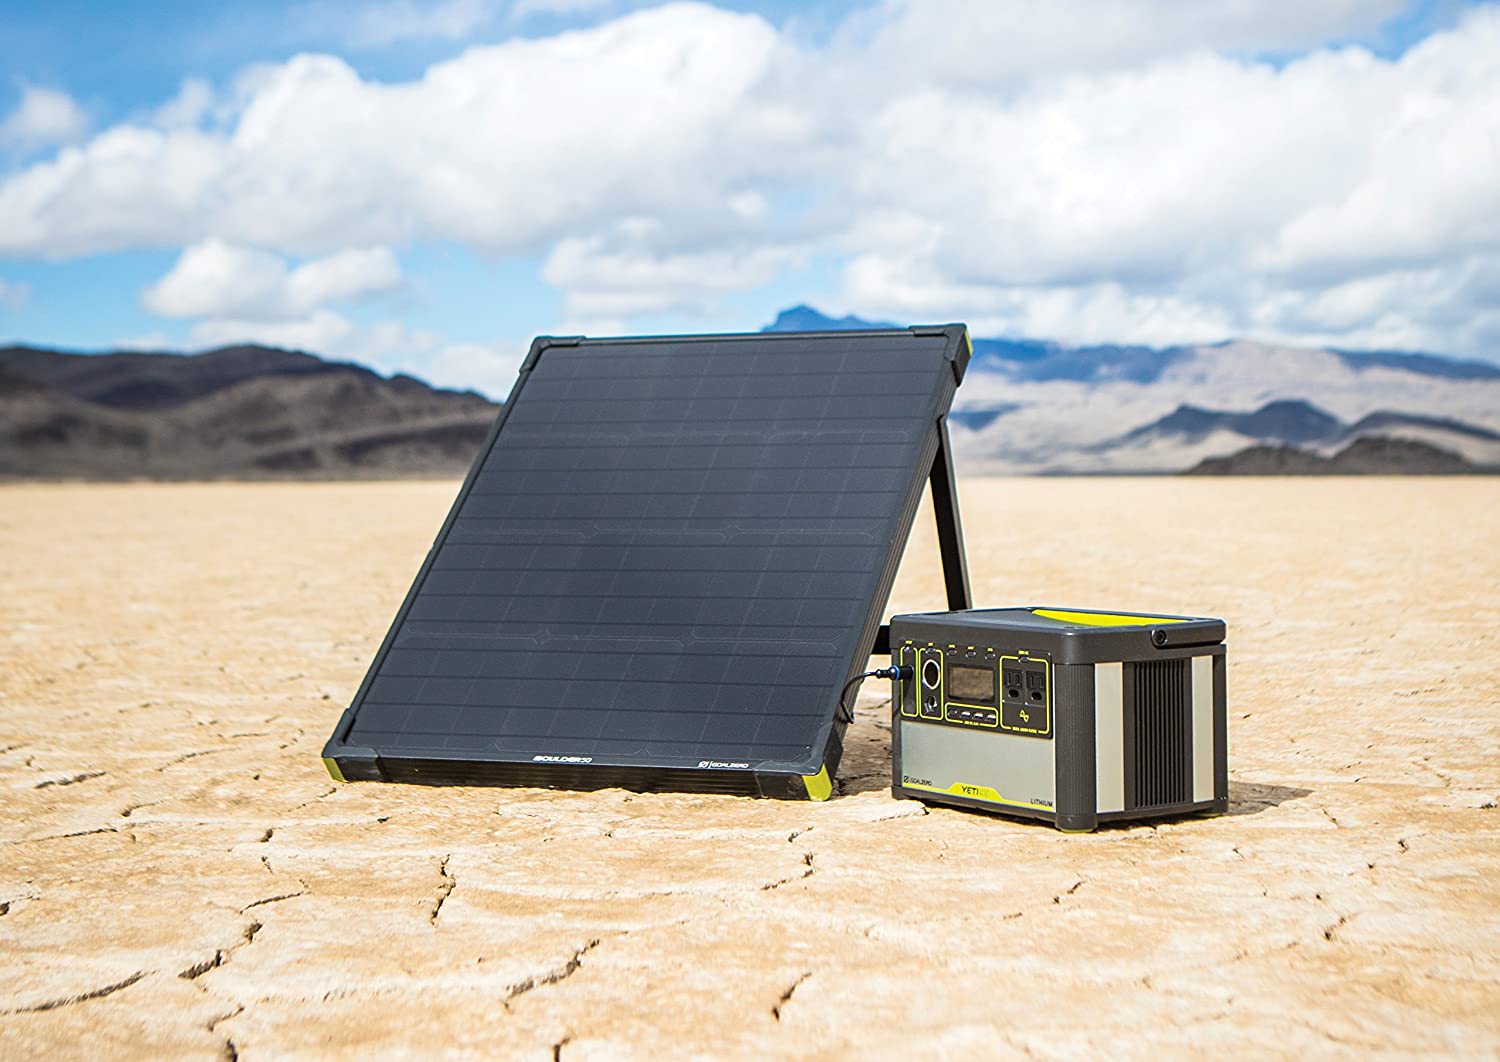 Choosing a Solar Generator: What You Should Look For